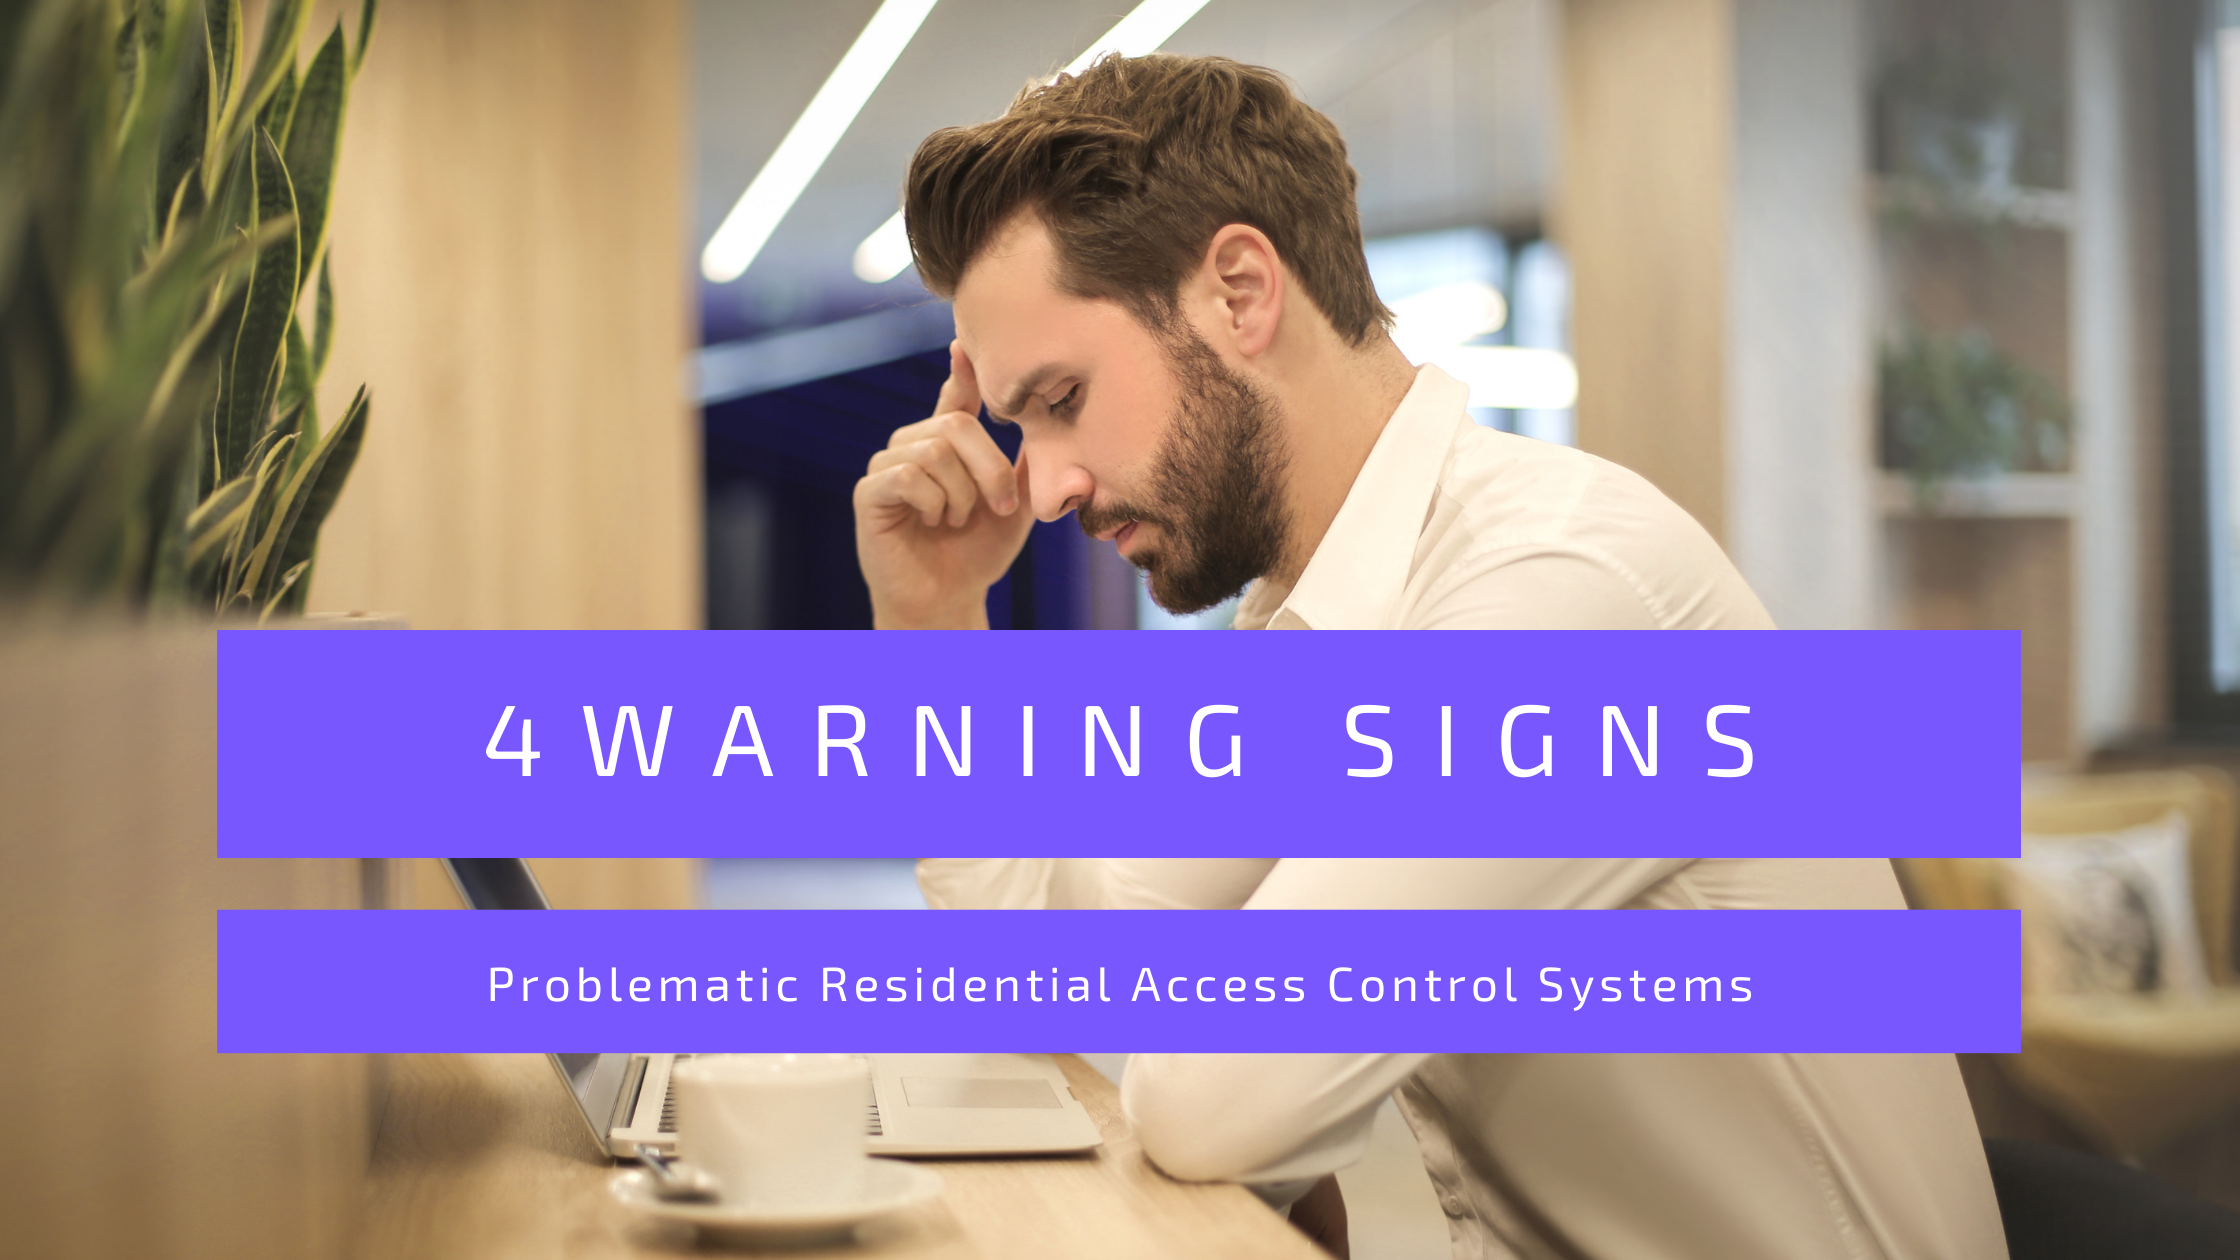 ONA 2 Do You Recognize the 4 Warning Signs of Problematic Residential Access Control Systems